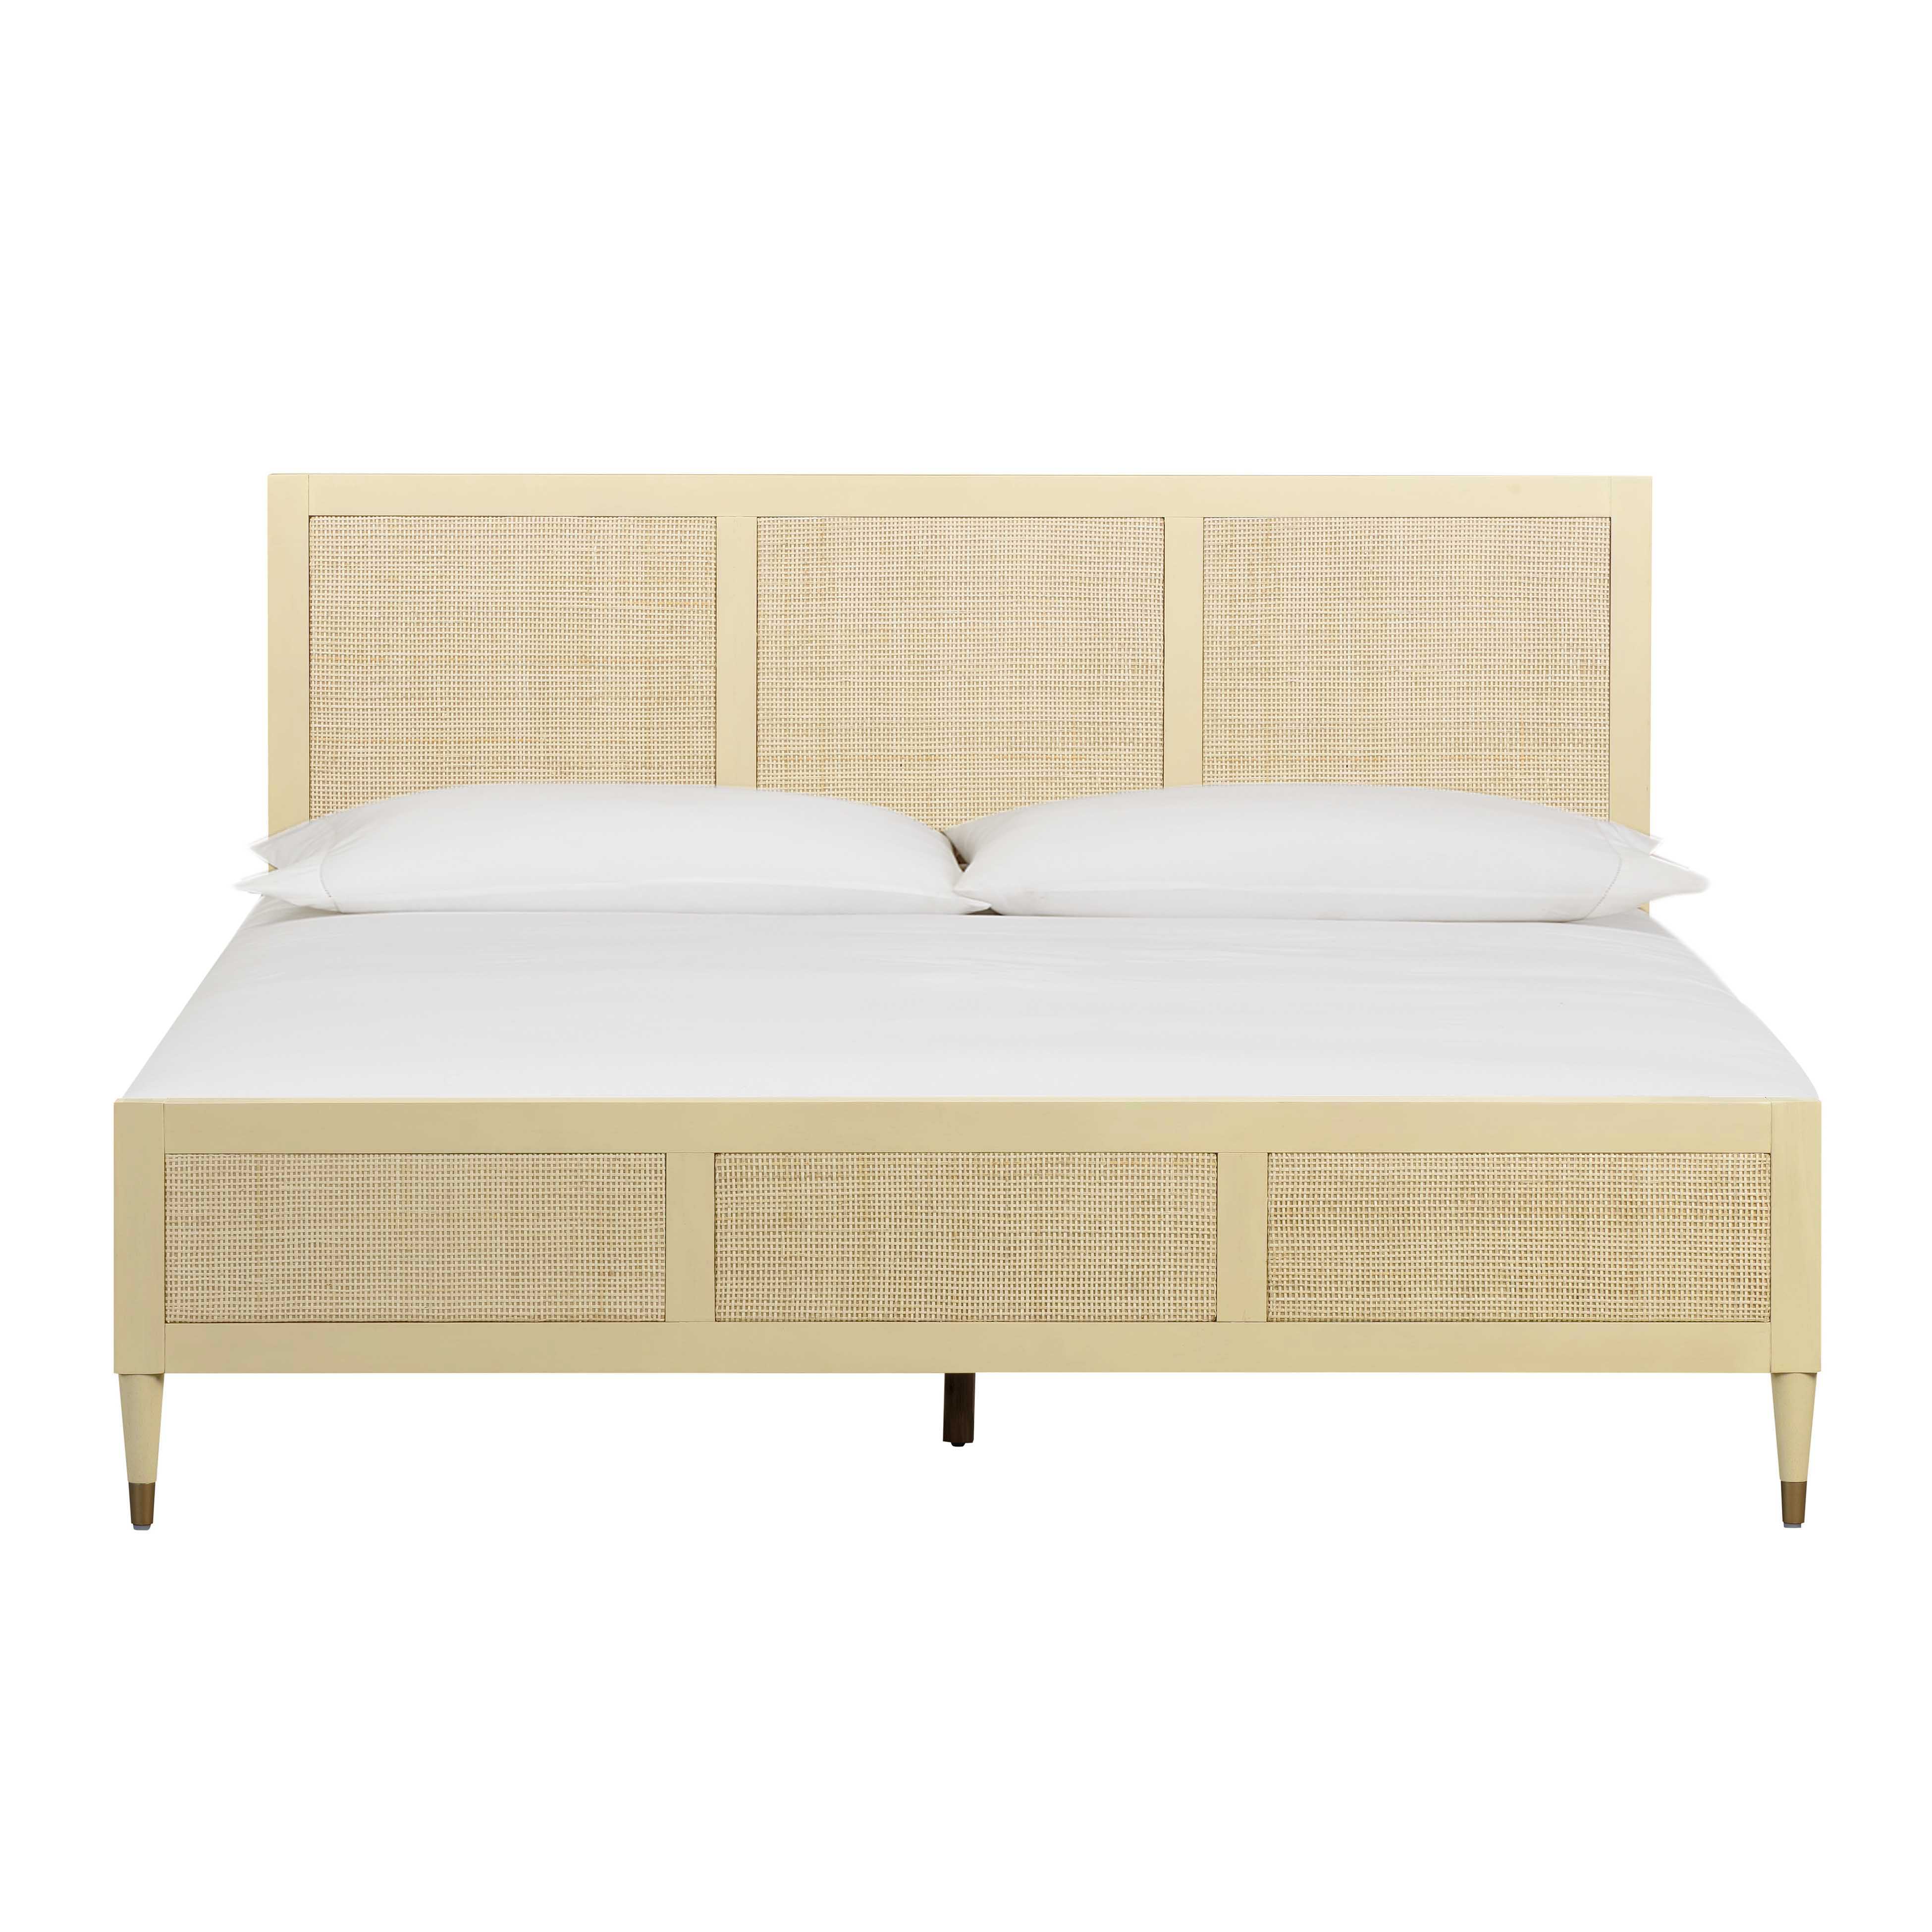 image of Sierra Buttermilk Bed in King with sku:TOV-B44104